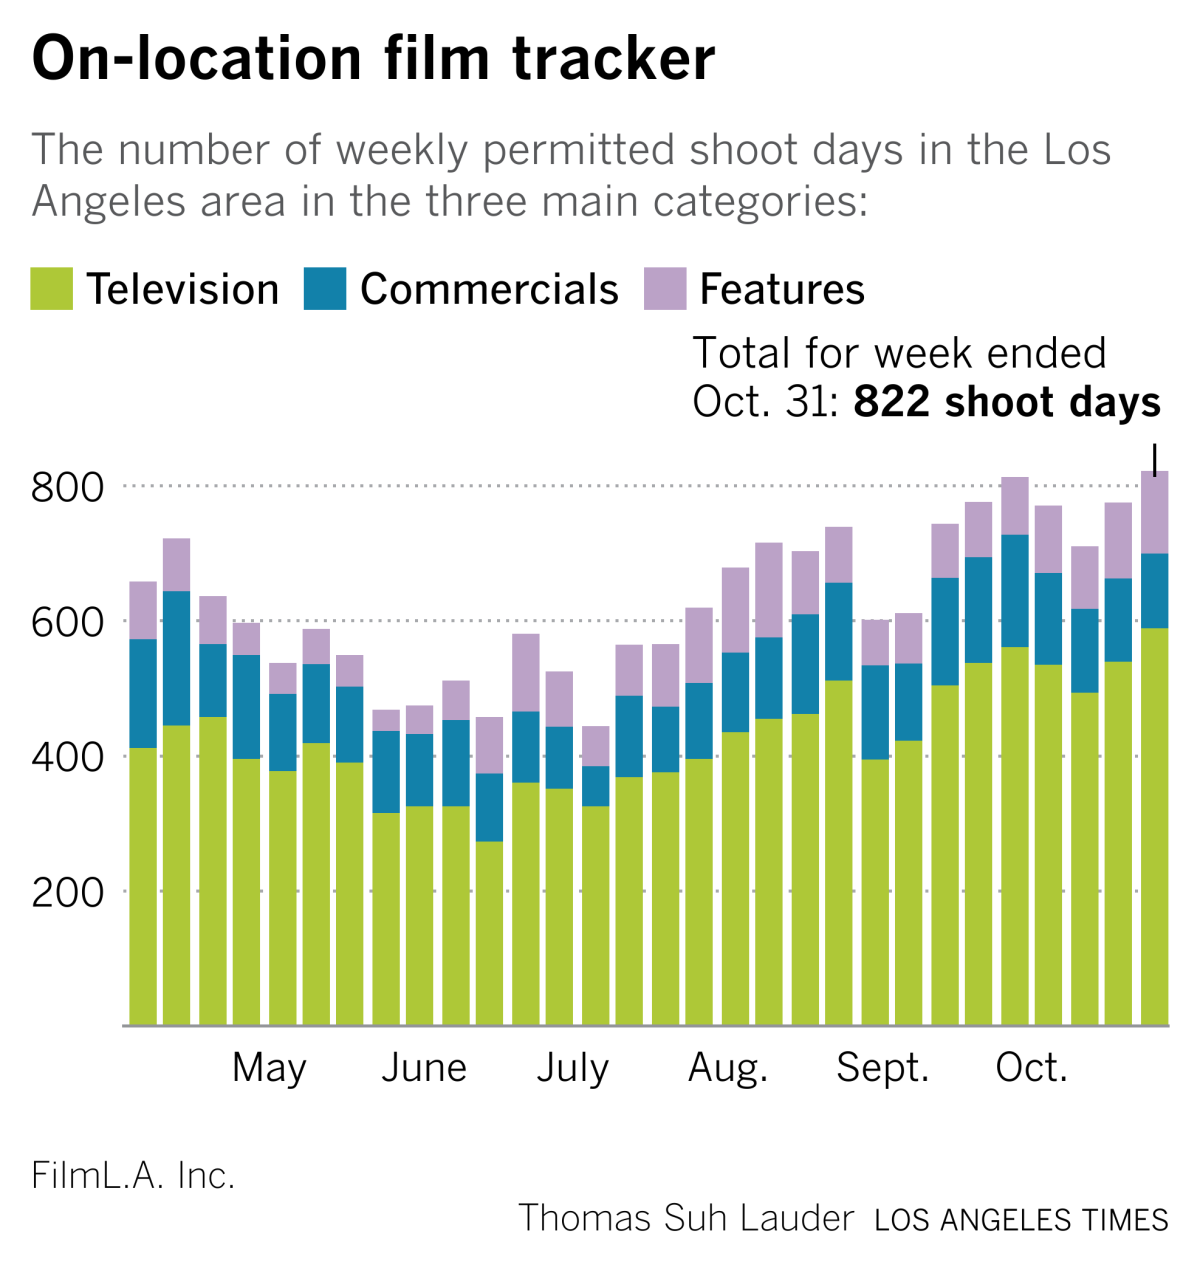 A graphic reads "On-location film tracker" and shows a high of 822 shoot days on Oct. 31.